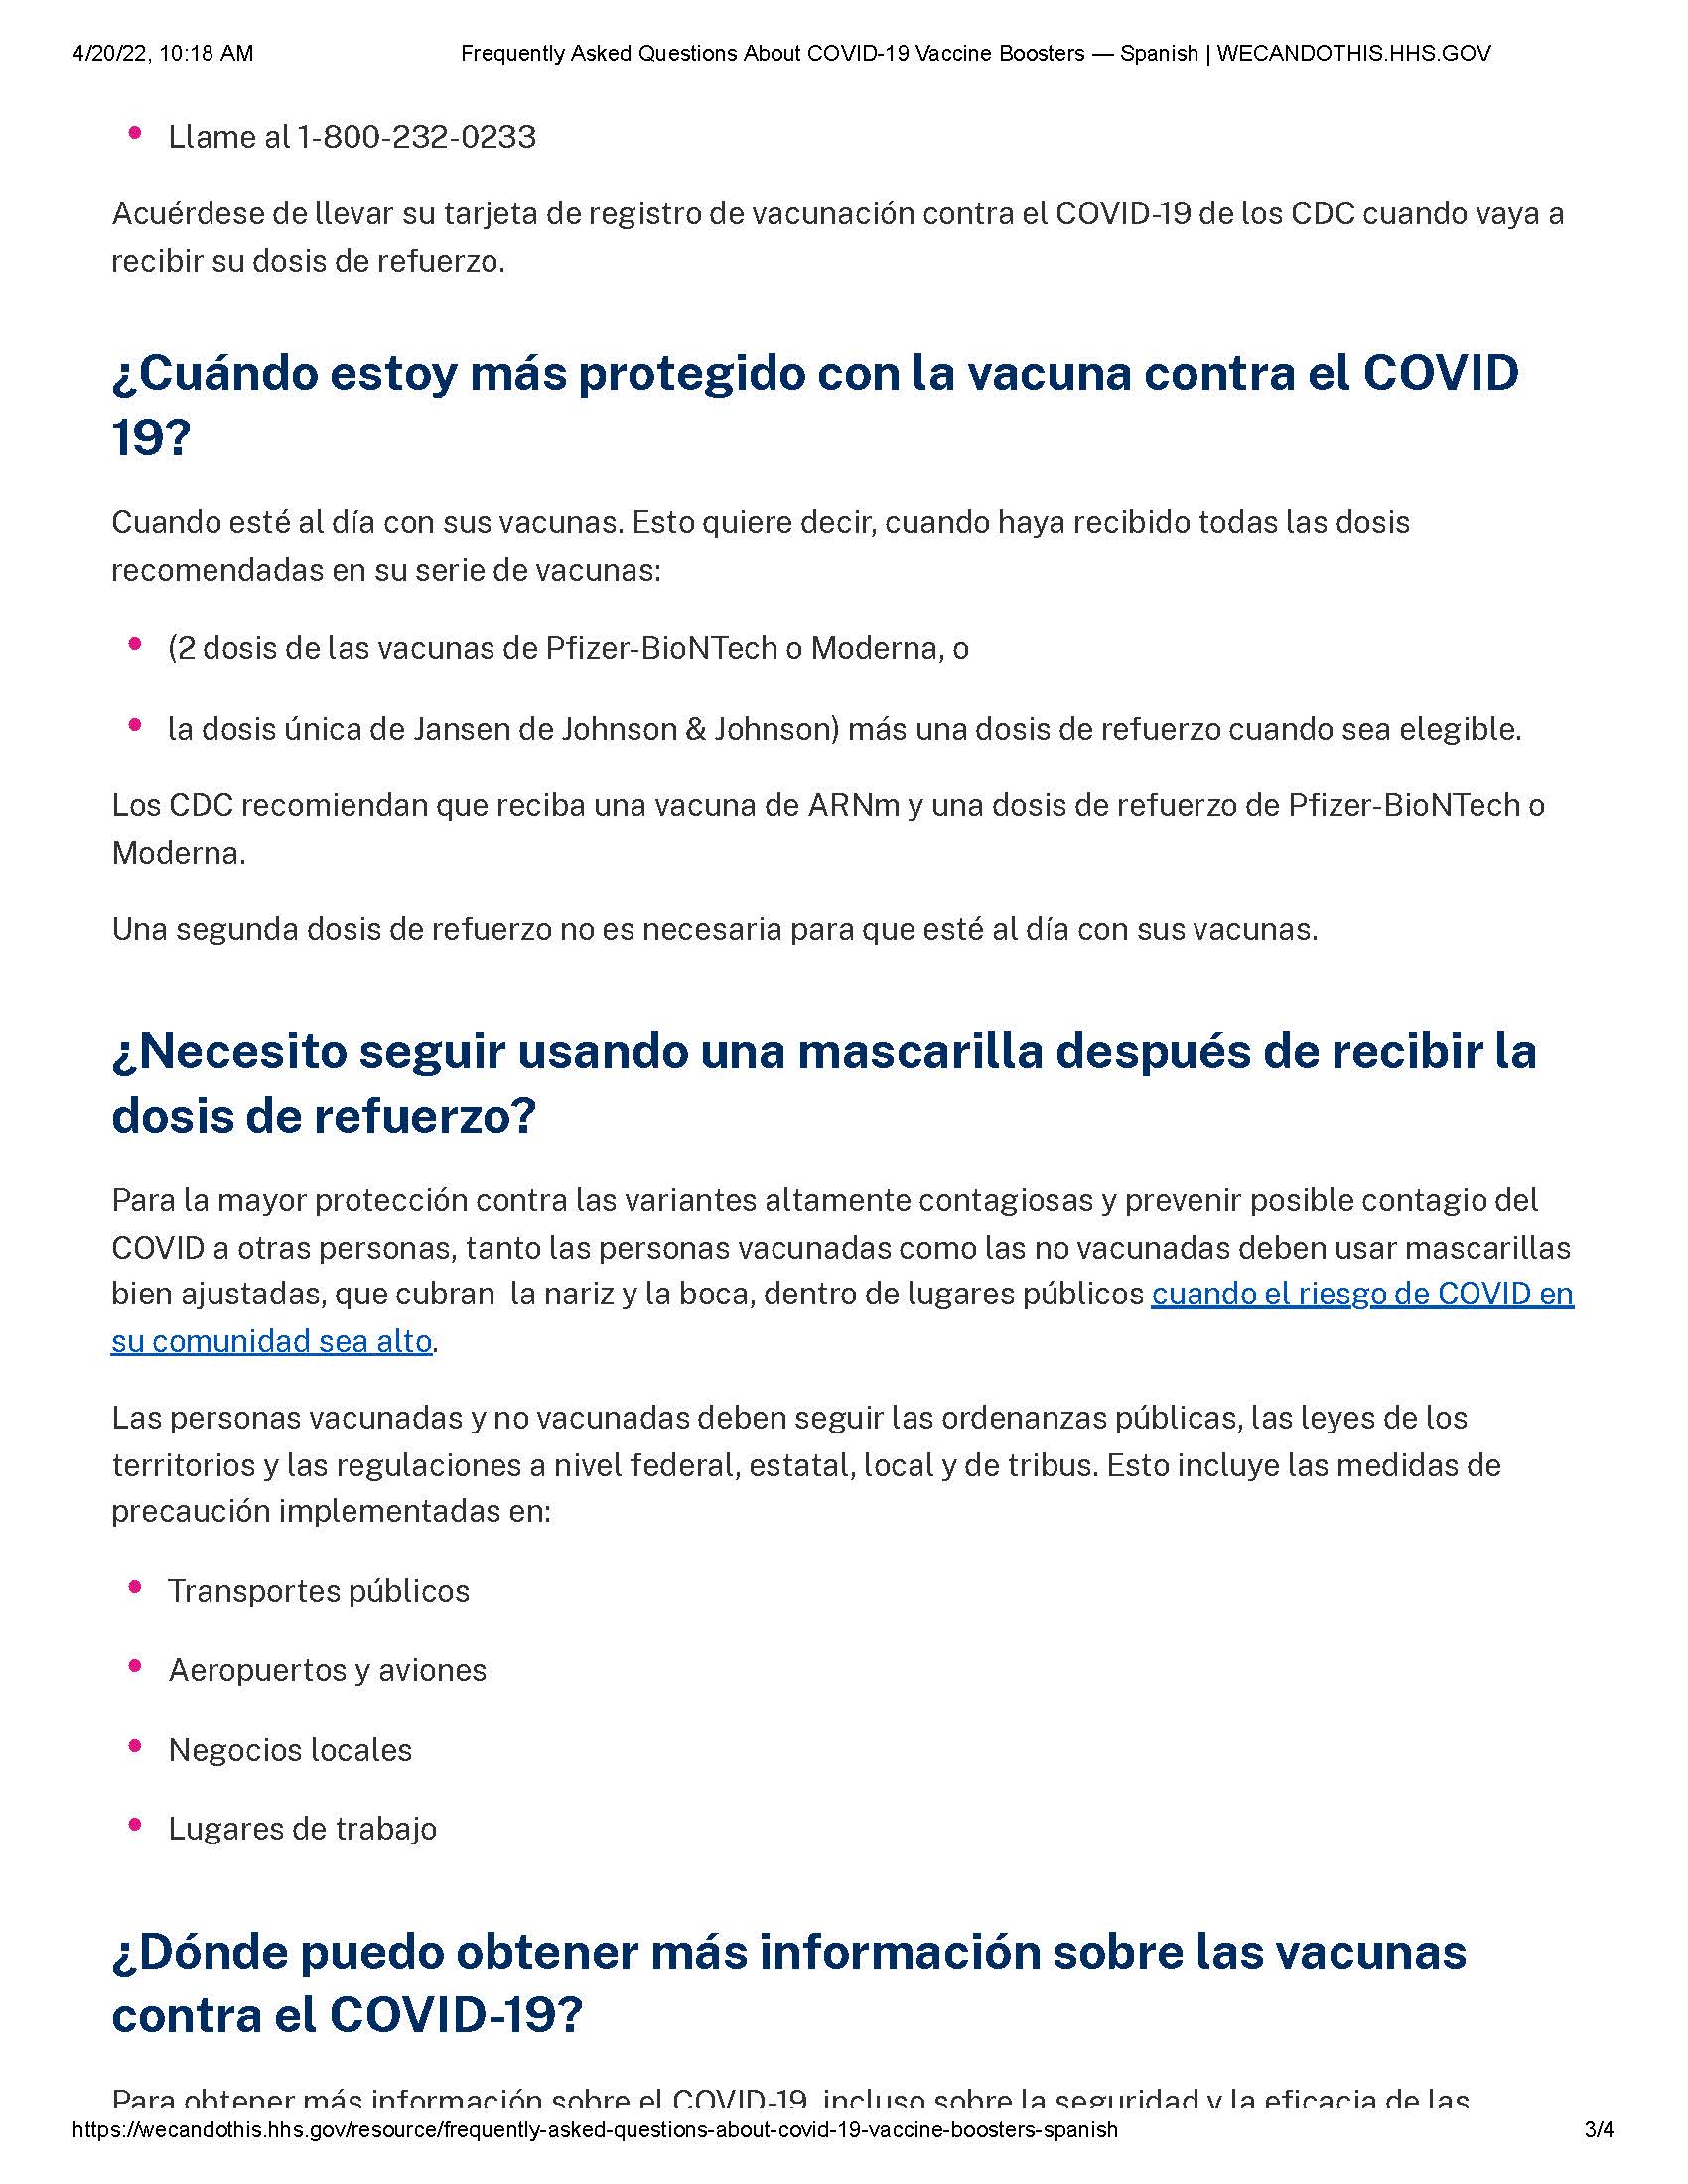 Frequently Asked Questions About COVID-19 Vaccine Boosters — Spanish _ WECANDOTHIS.HHS.GOV_Page_3